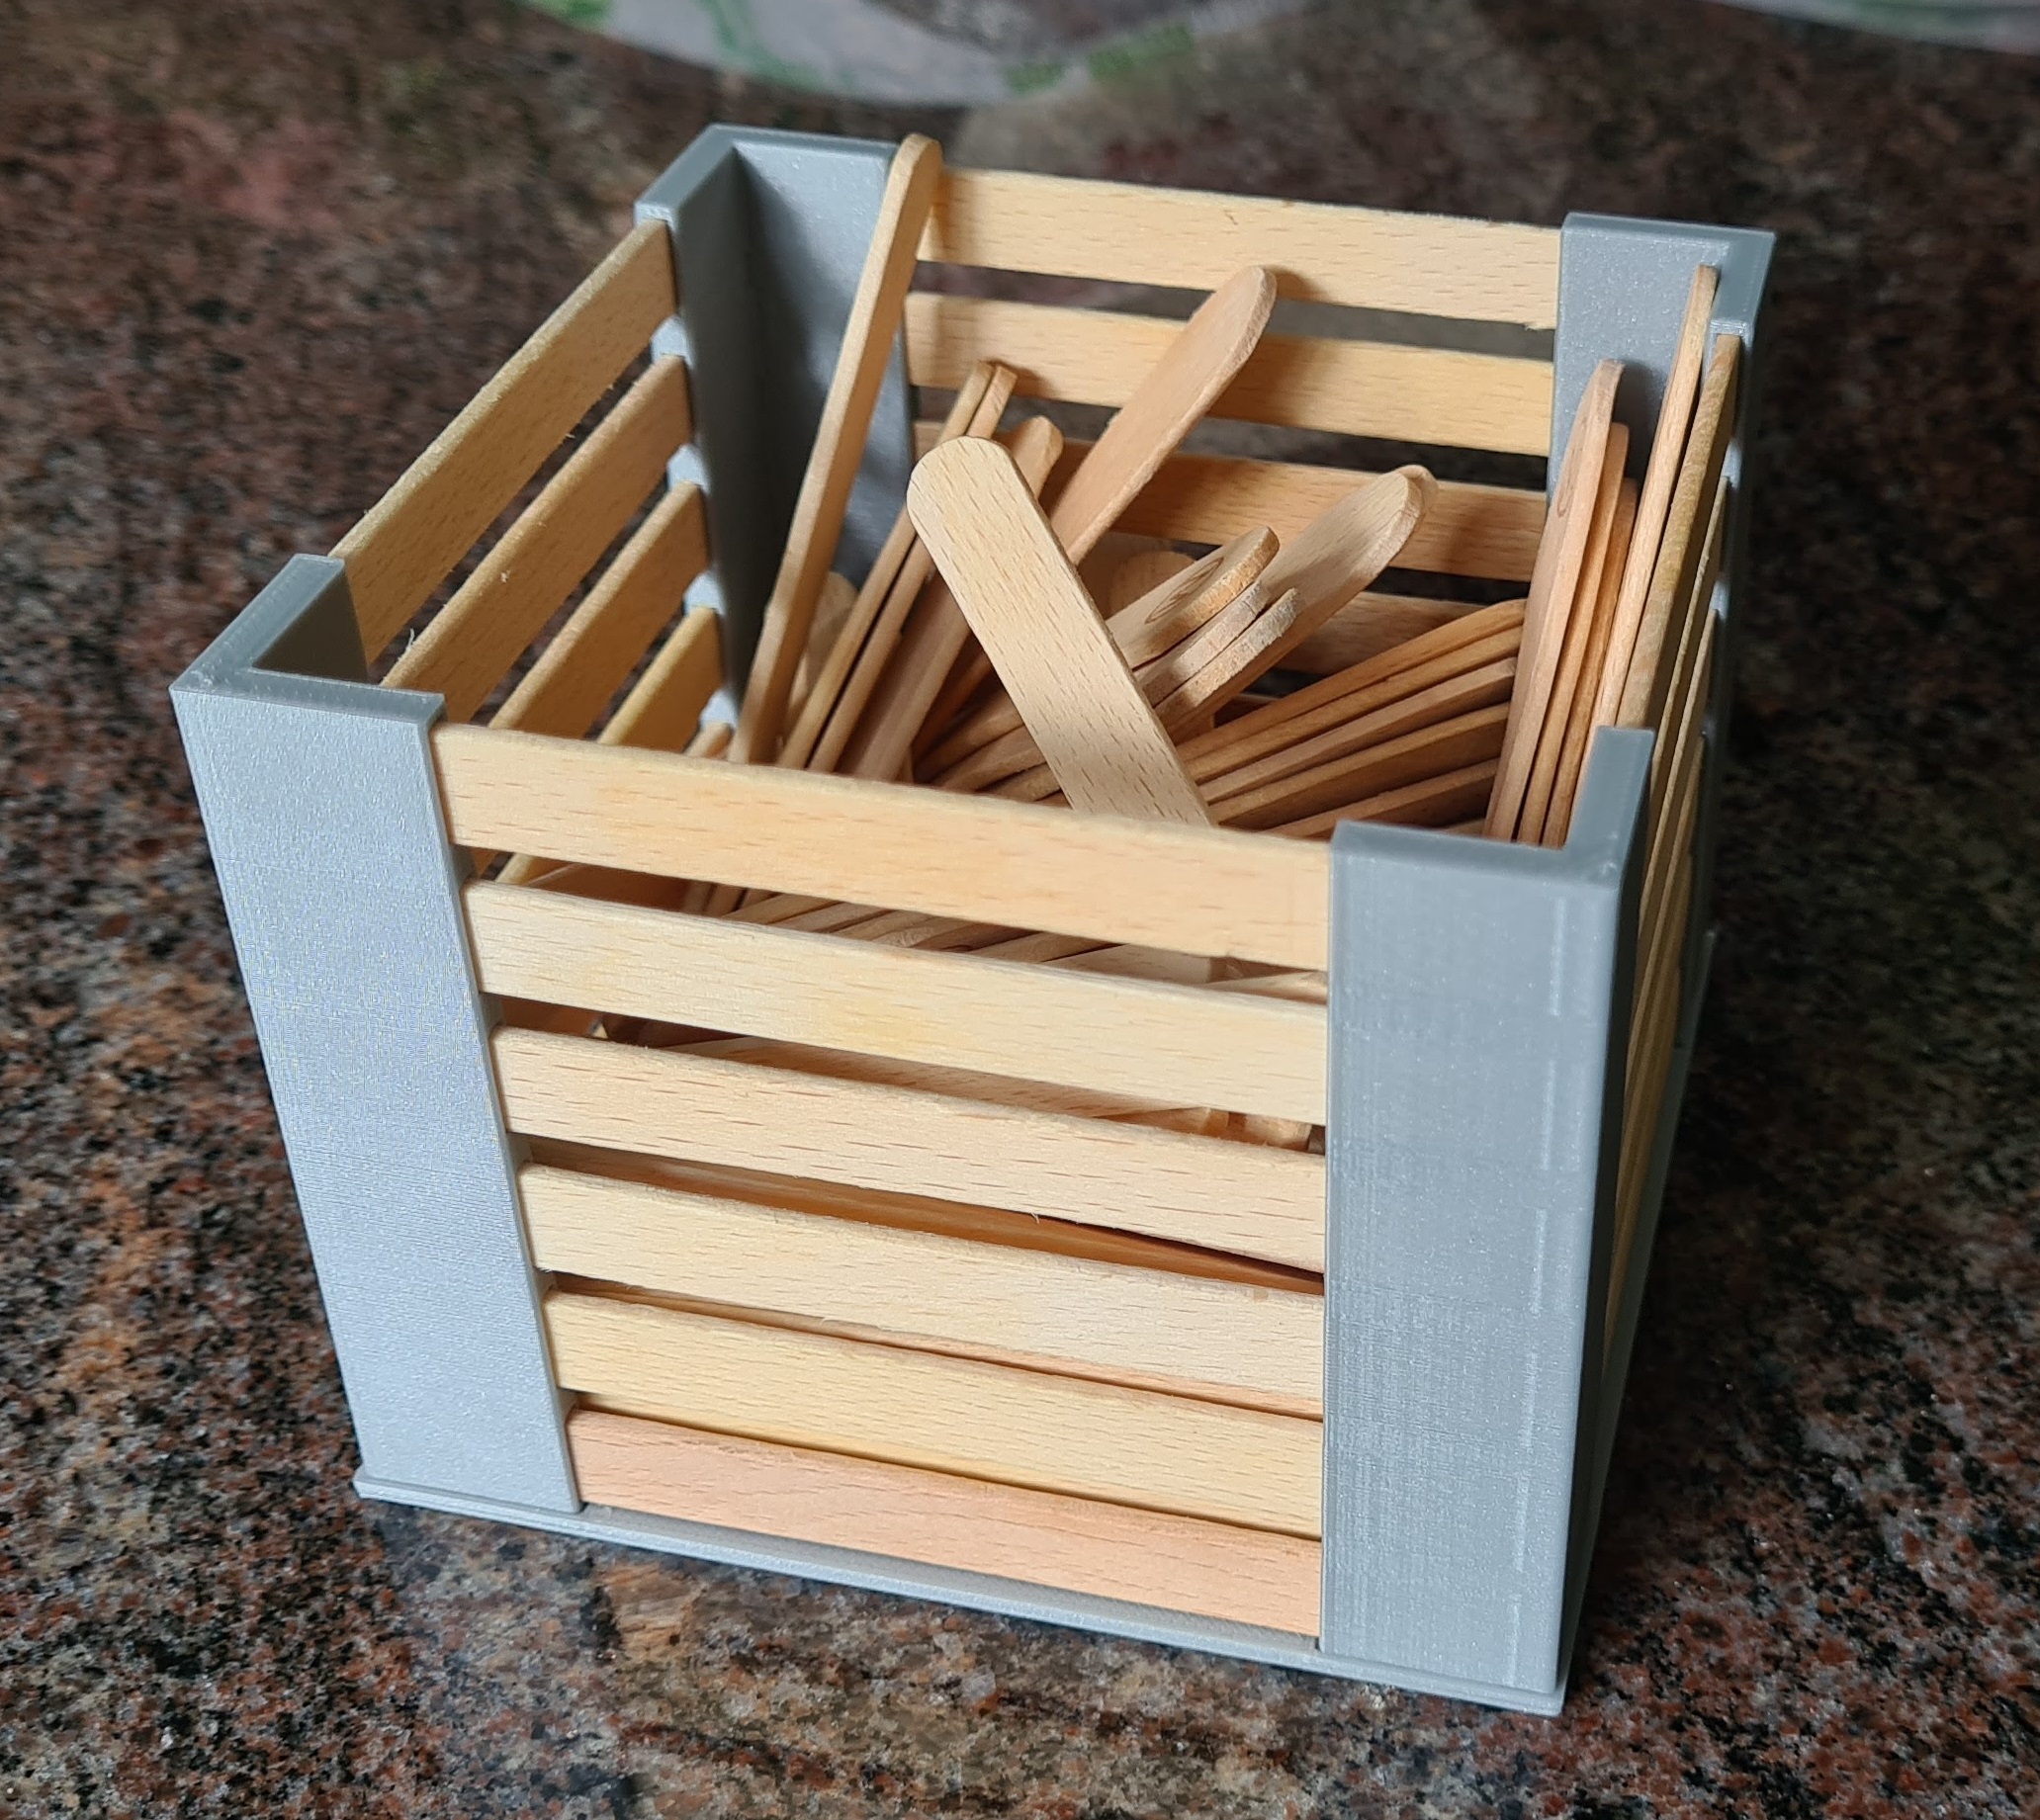 Popsicle stick crate